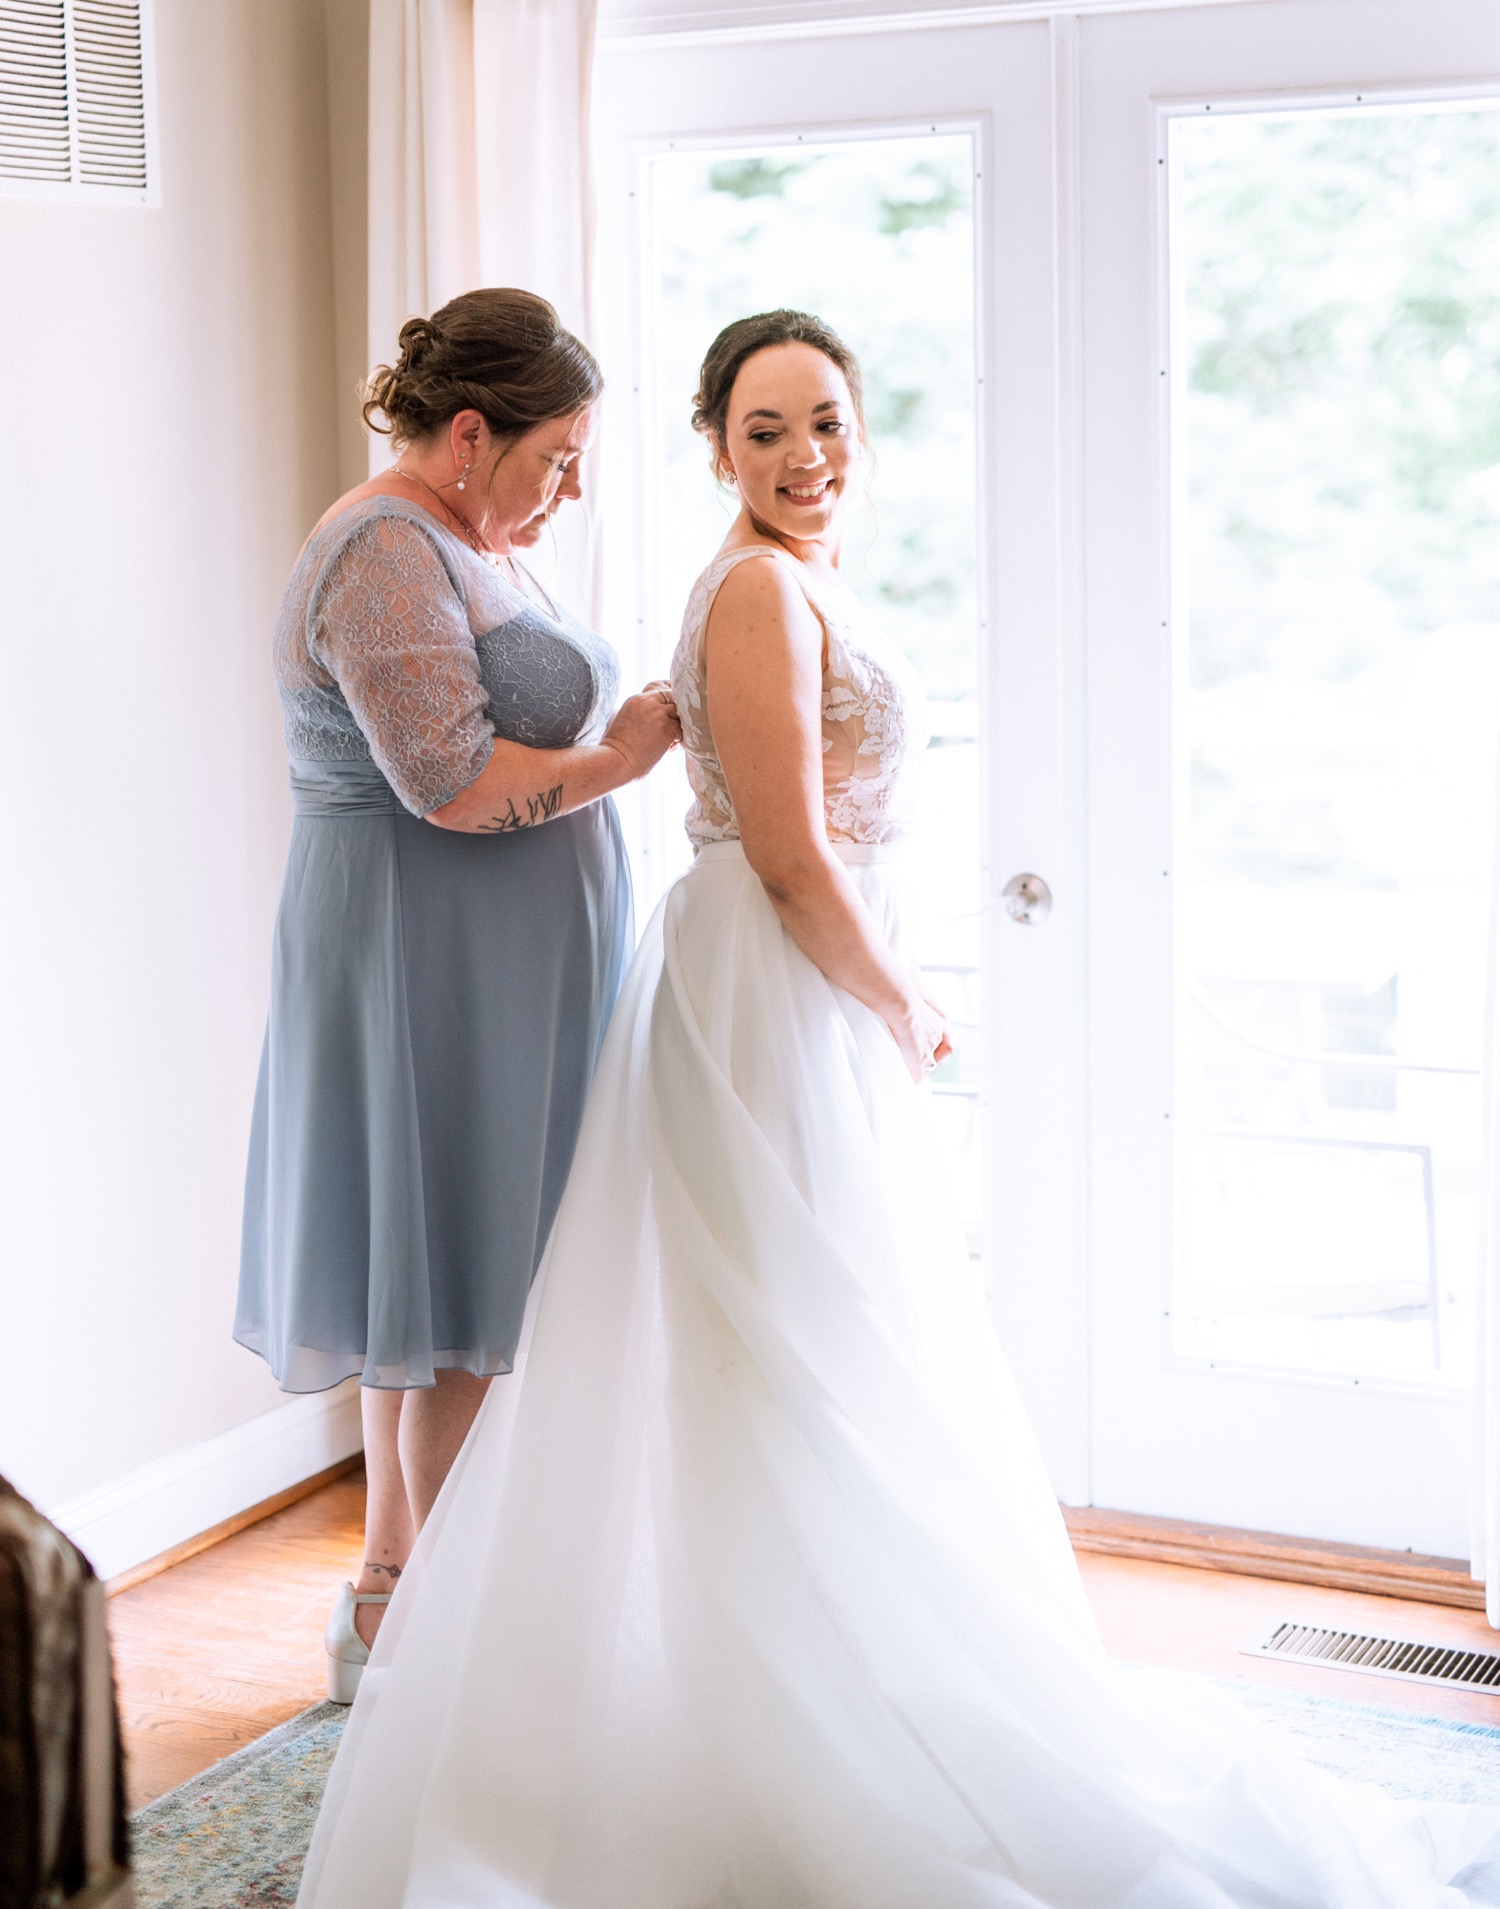 Mother helping daughter button up her dress before her wedding ceremony at James Monroe's Highland in Charlottesville, VA